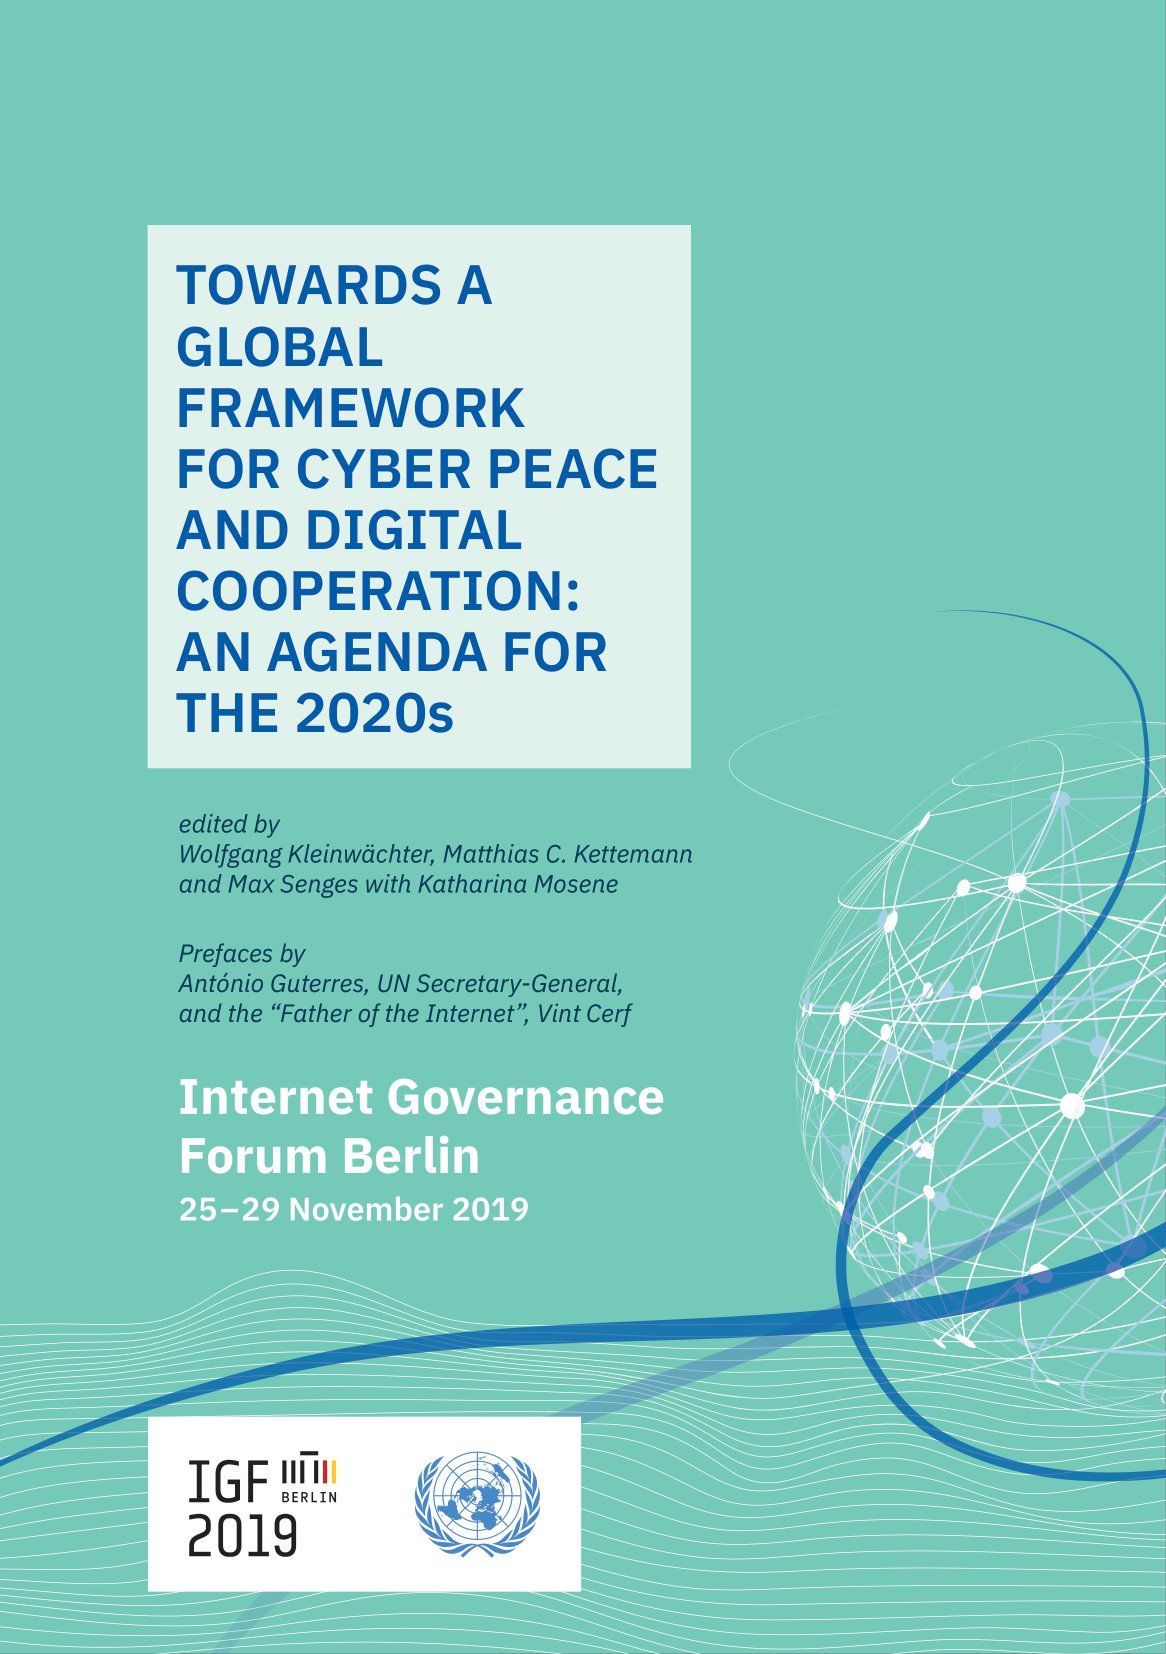 Towards a Global Framework for Cyber Peace and Digital Cooperation. An Agenda for the 2020s